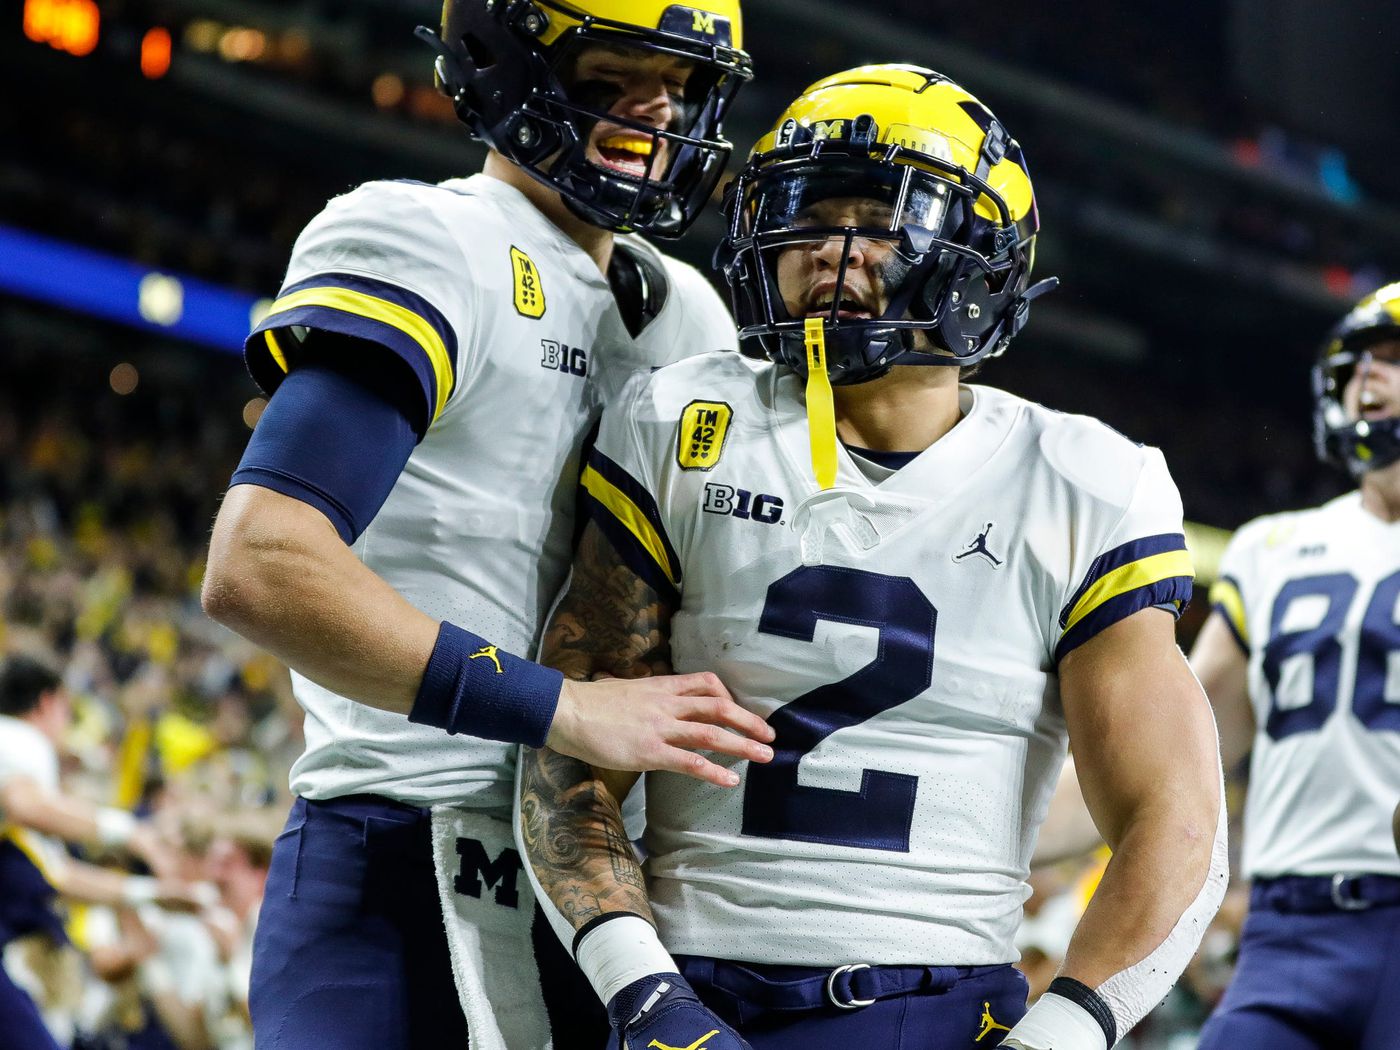 Blake Corum going beast mode on bench press will have Michigan fans hyped